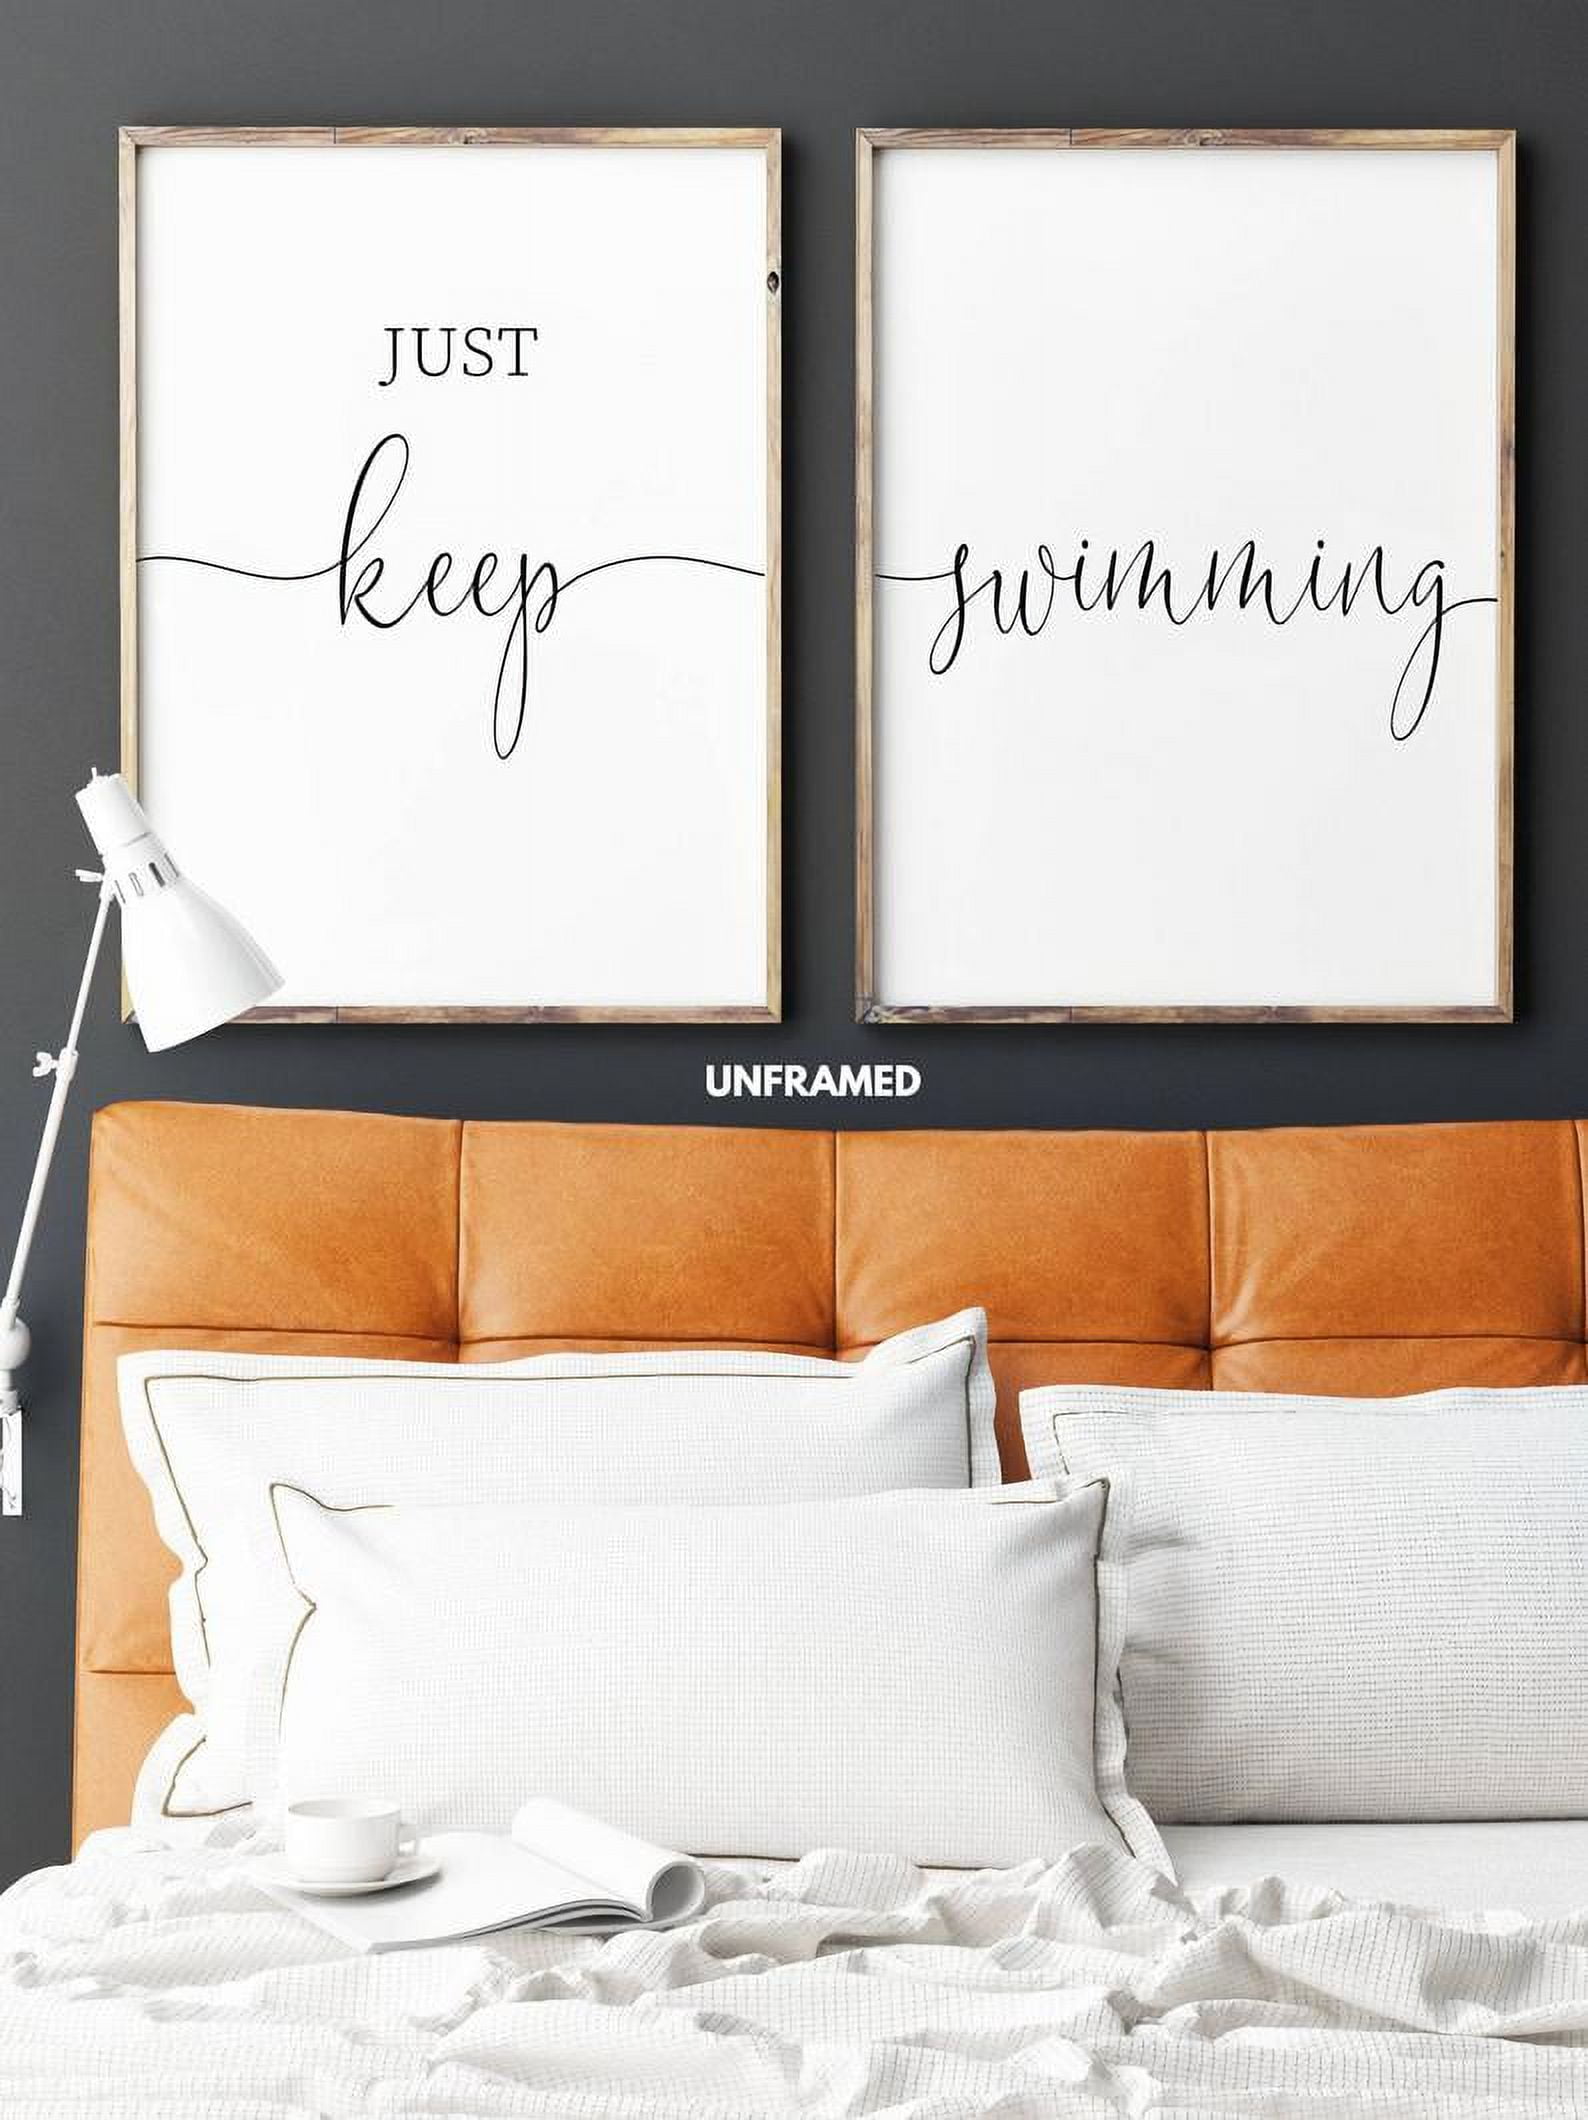 of Art, Bedroom Art, 2 Poster Swimming, Just Wall Posters, Typography Keep Minimalist Set